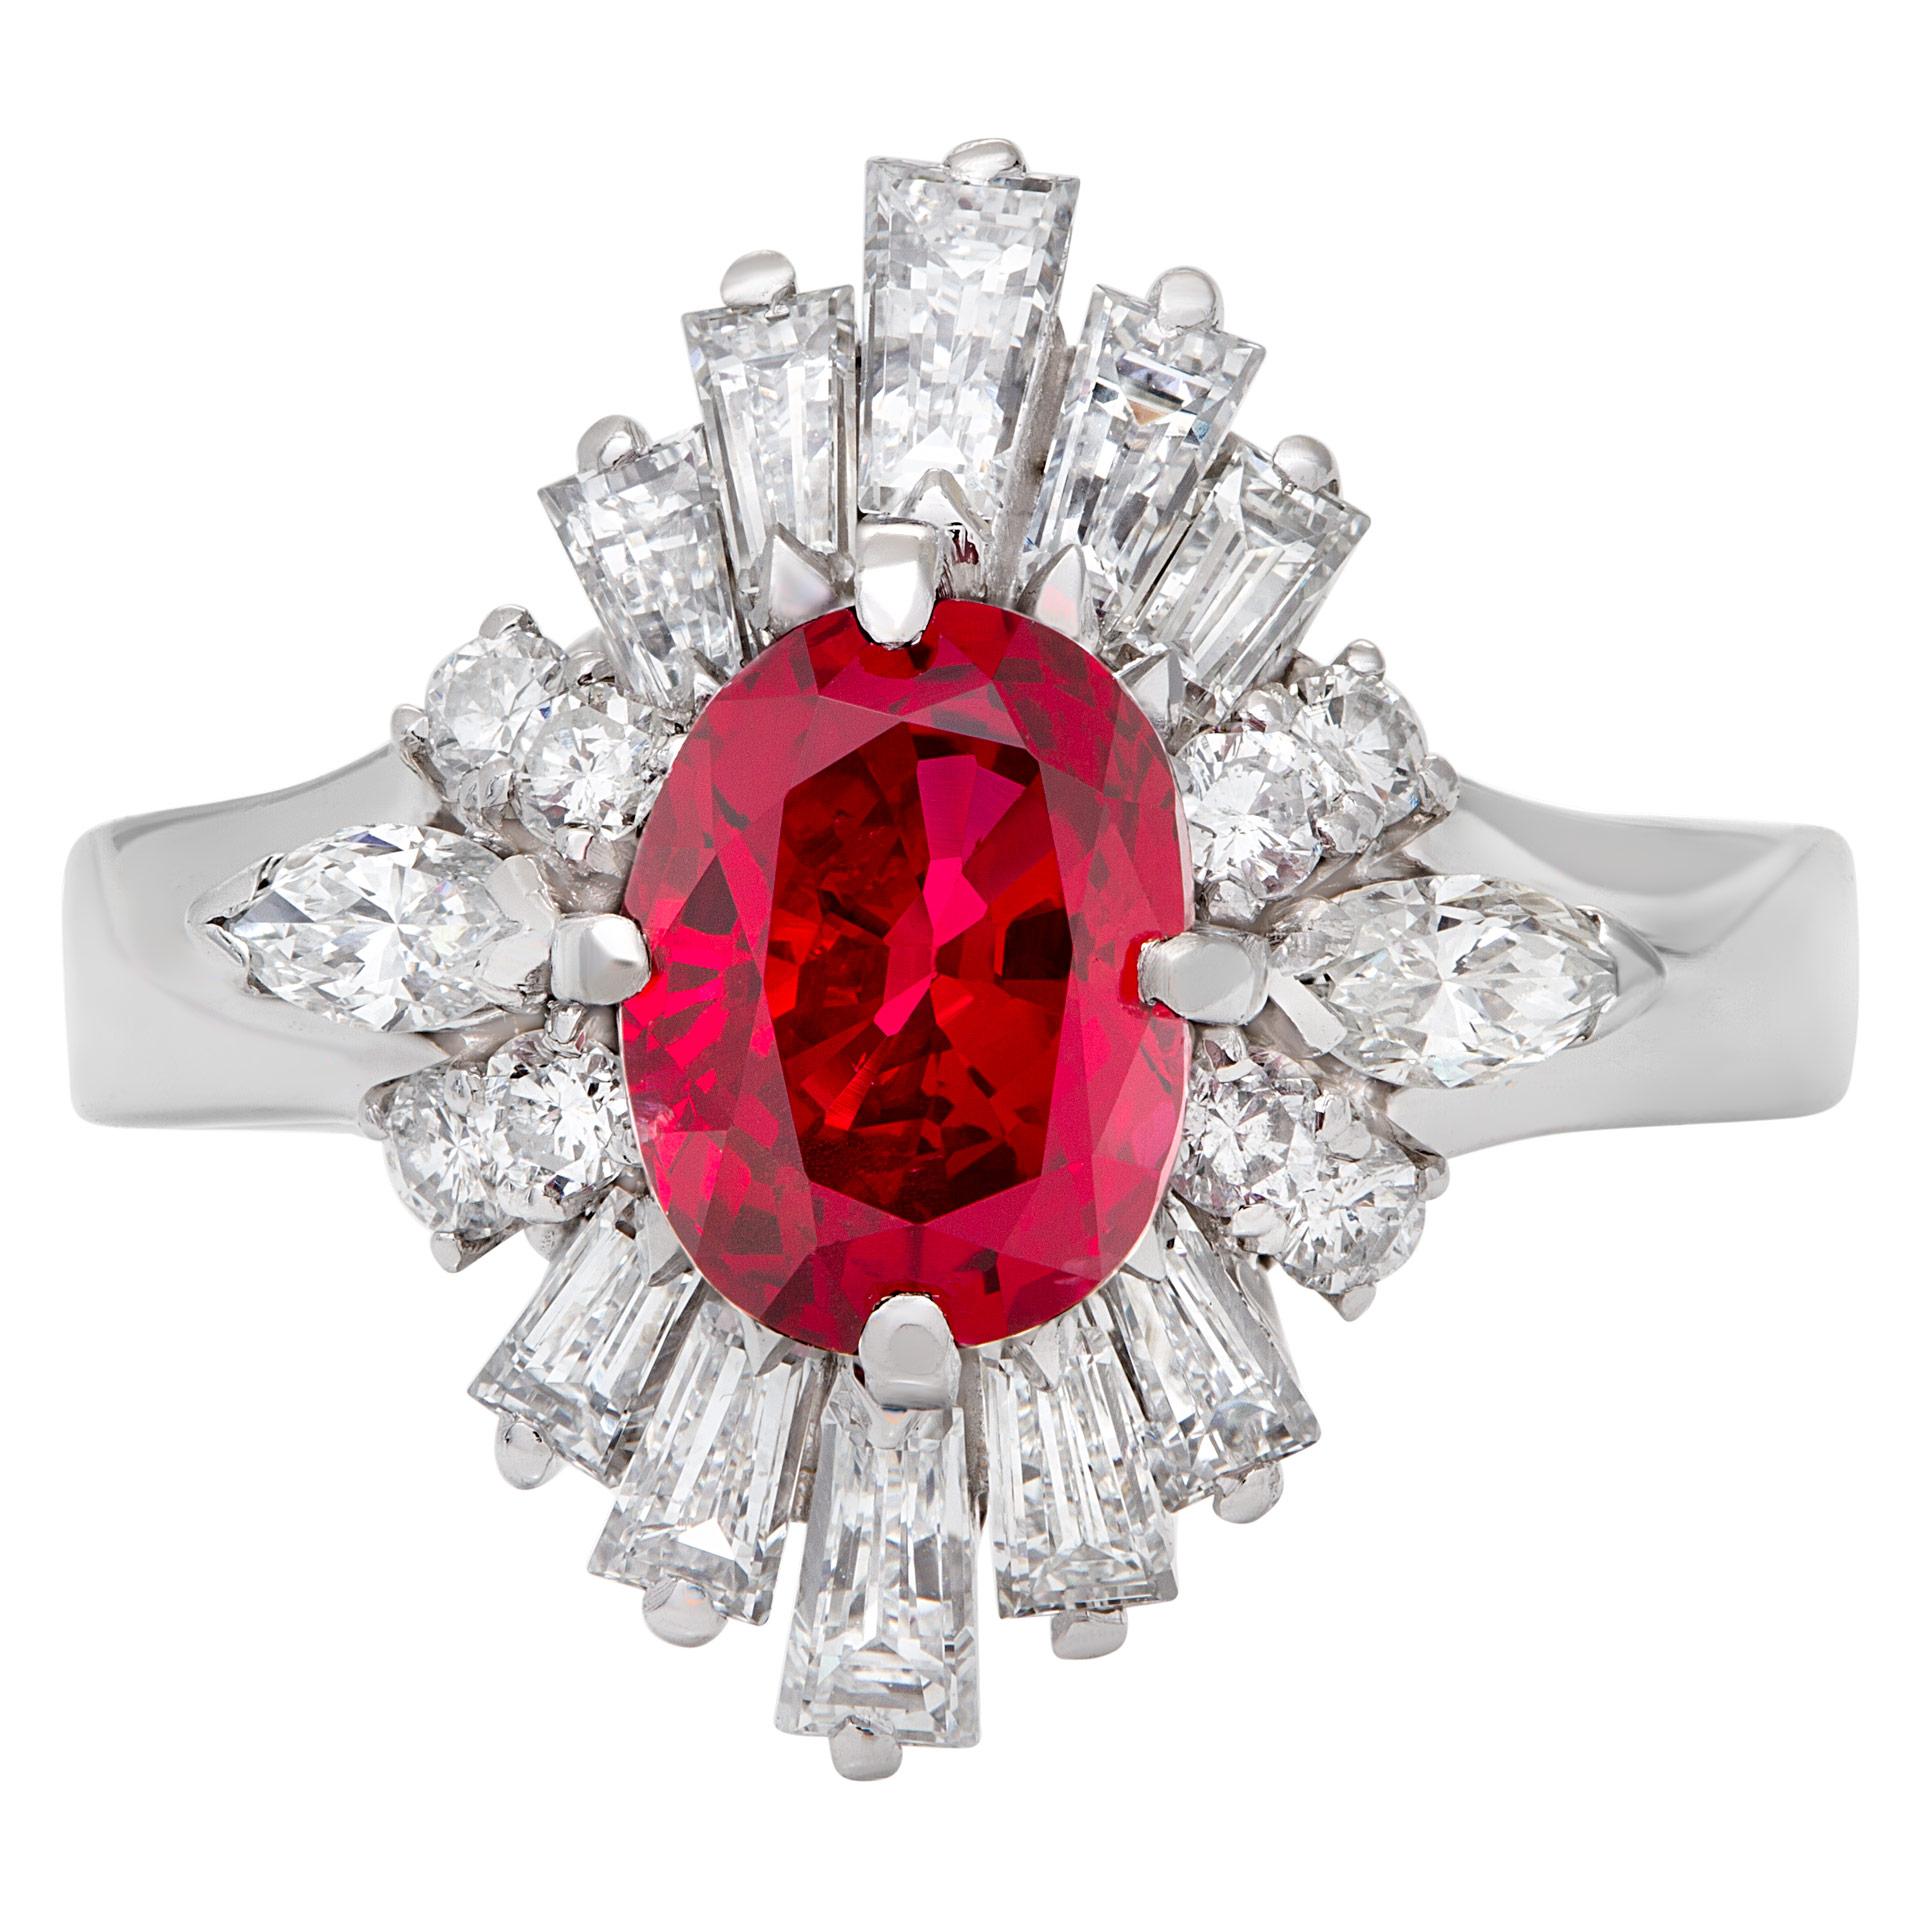 AGL certified oval 1.81 carat center ruby (heated, color excellent, Thailand origin) ring with 1.22 cts tapered baguette, marquise and round diamonds mounted in platinum. Size 6.  This AGL certified ring is currently size 6 and some items can be